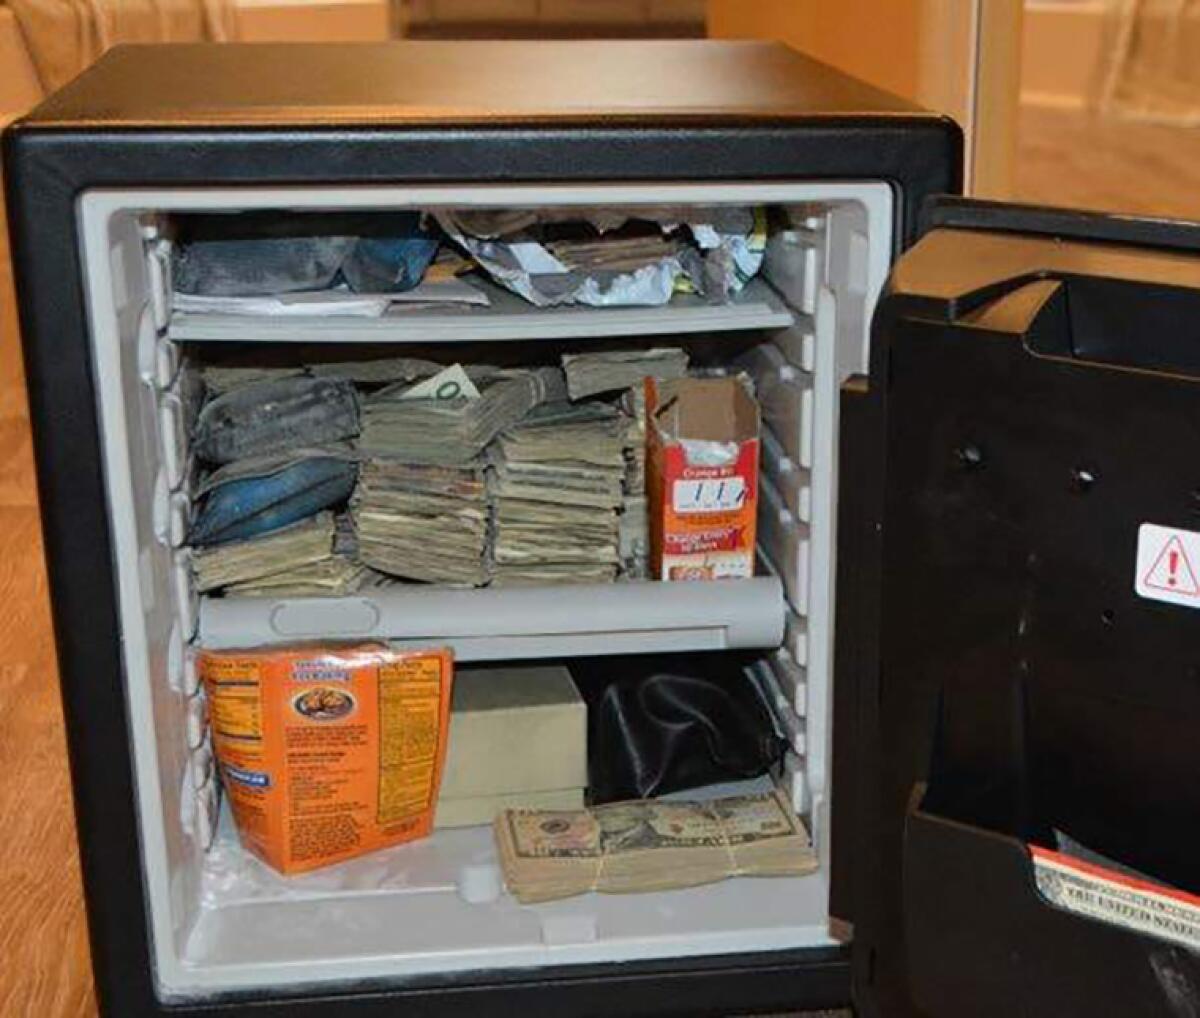 Bundles of cash stacked in a mini-refrigerator .